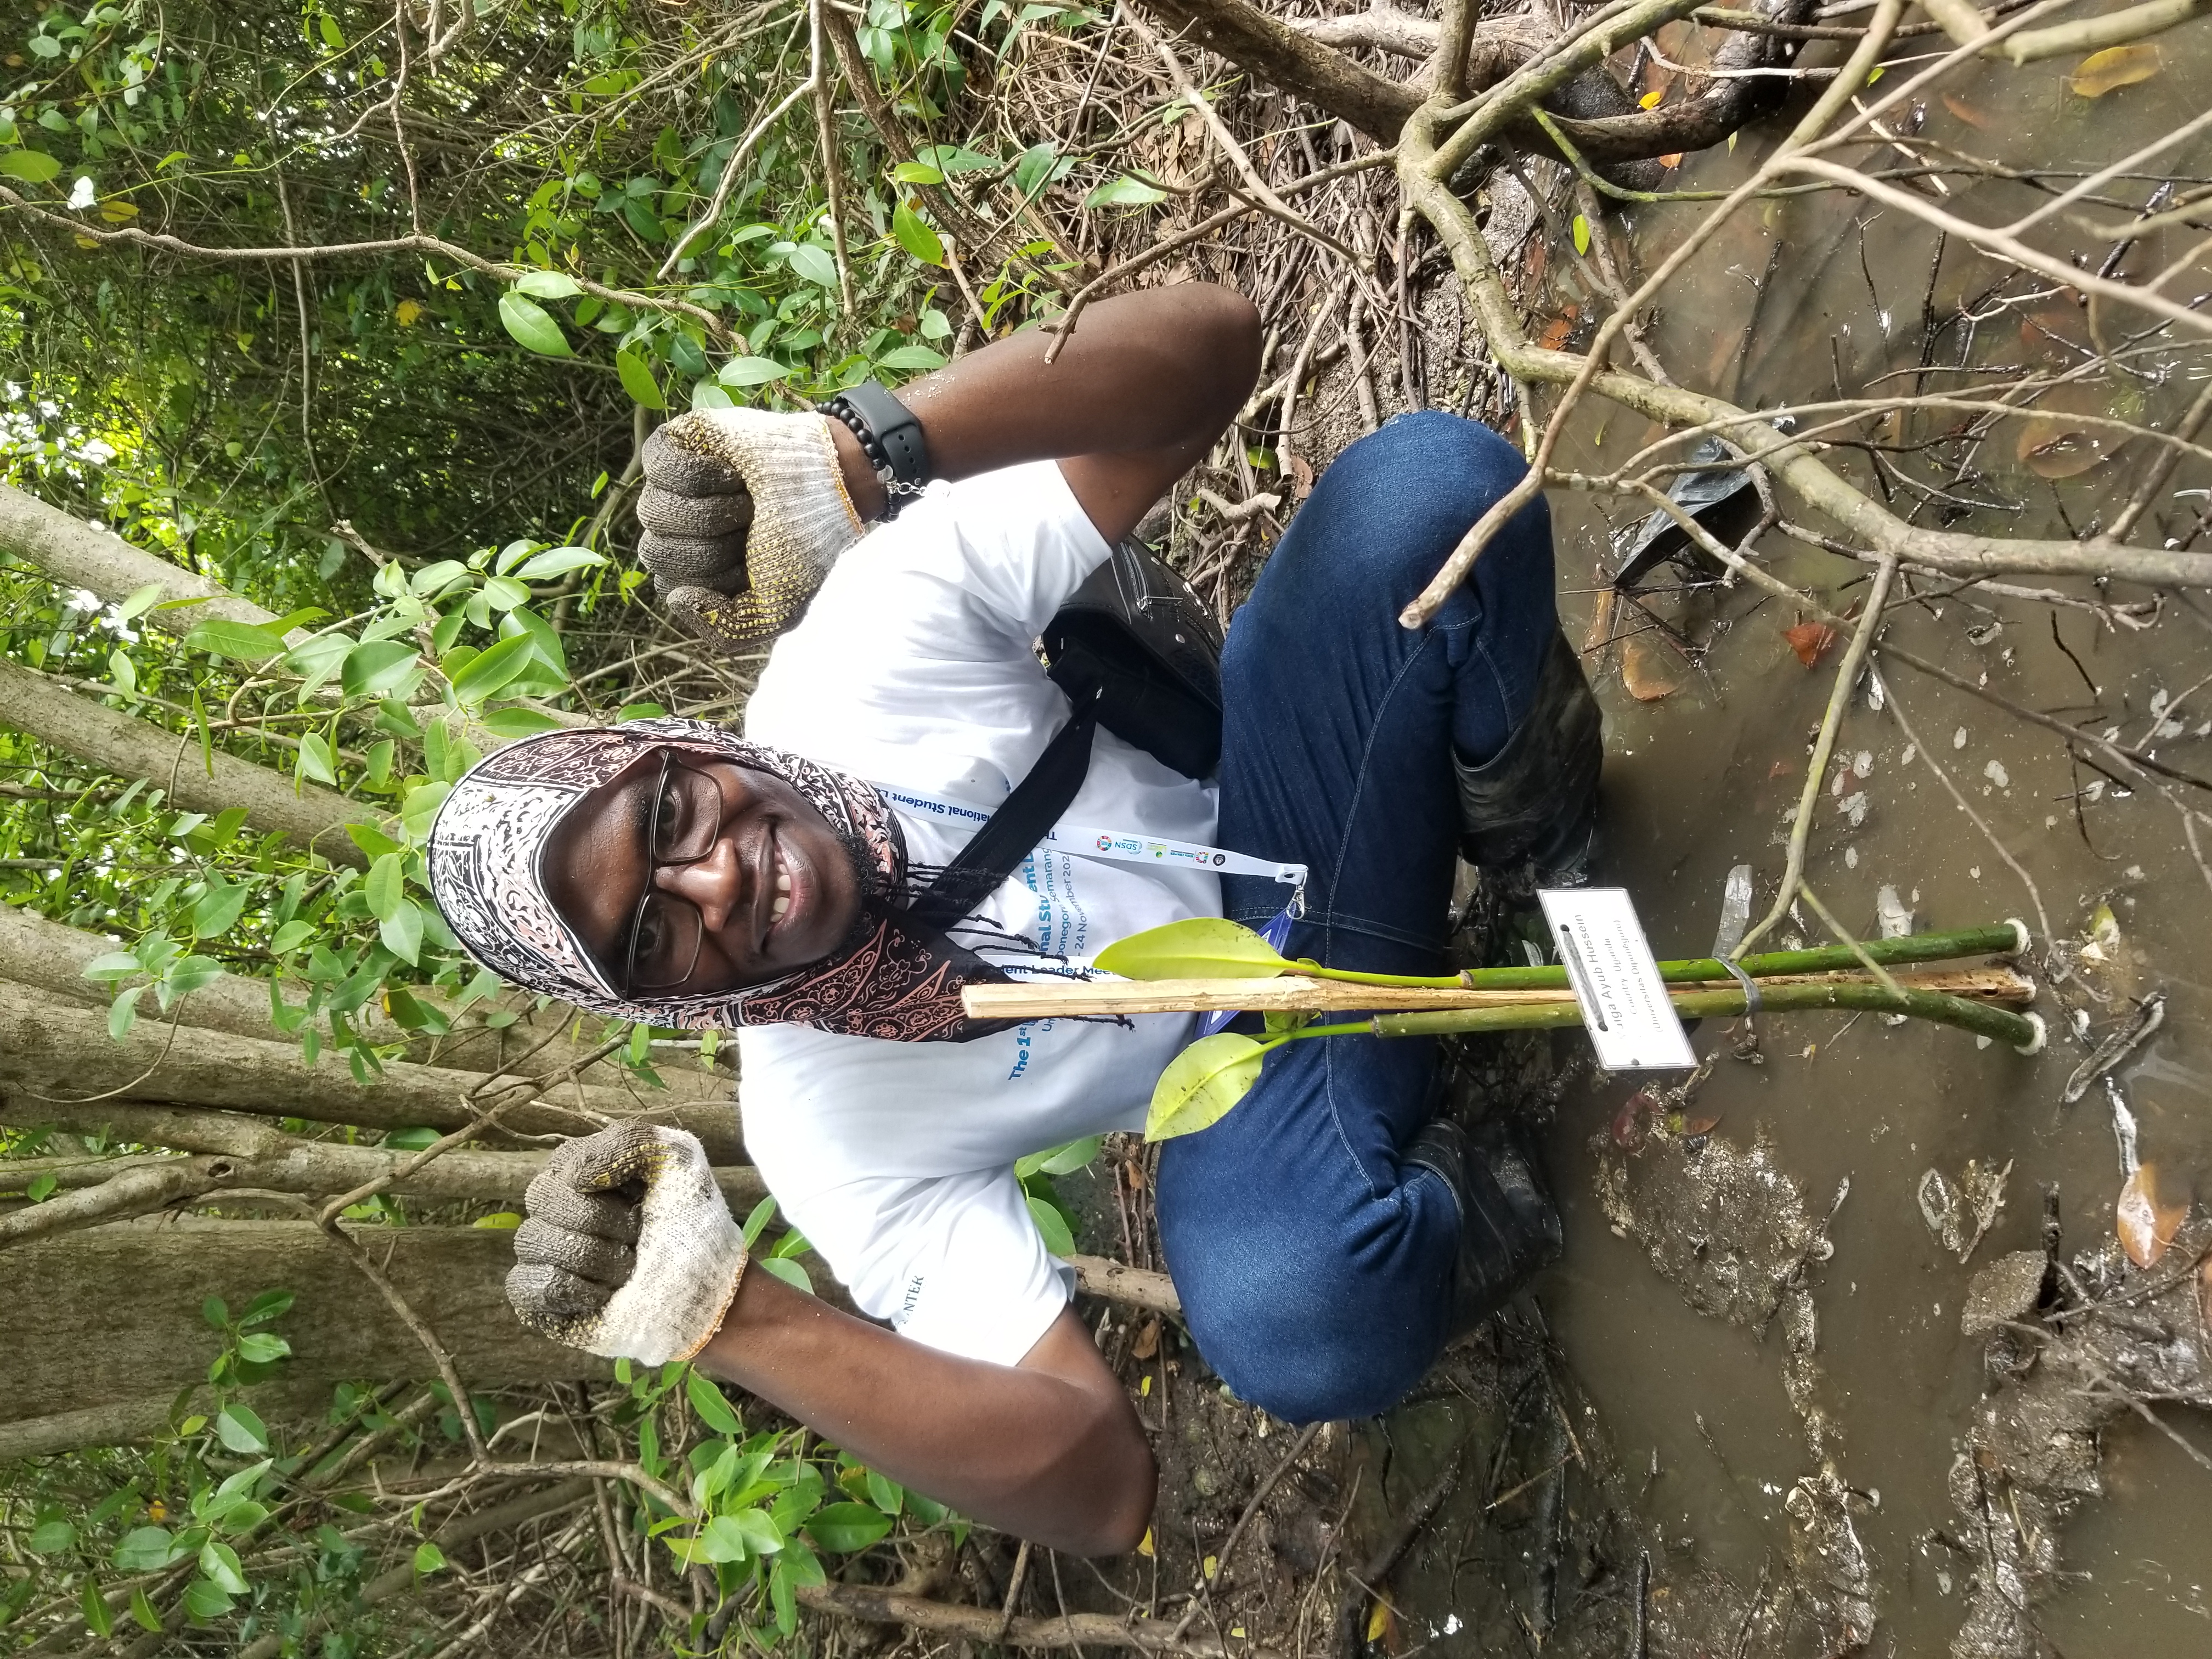 A person, looking happy, crouching in the mud and shallow water, with vegetation in the background. In the foreground, there is a small plant on a splint with a label.